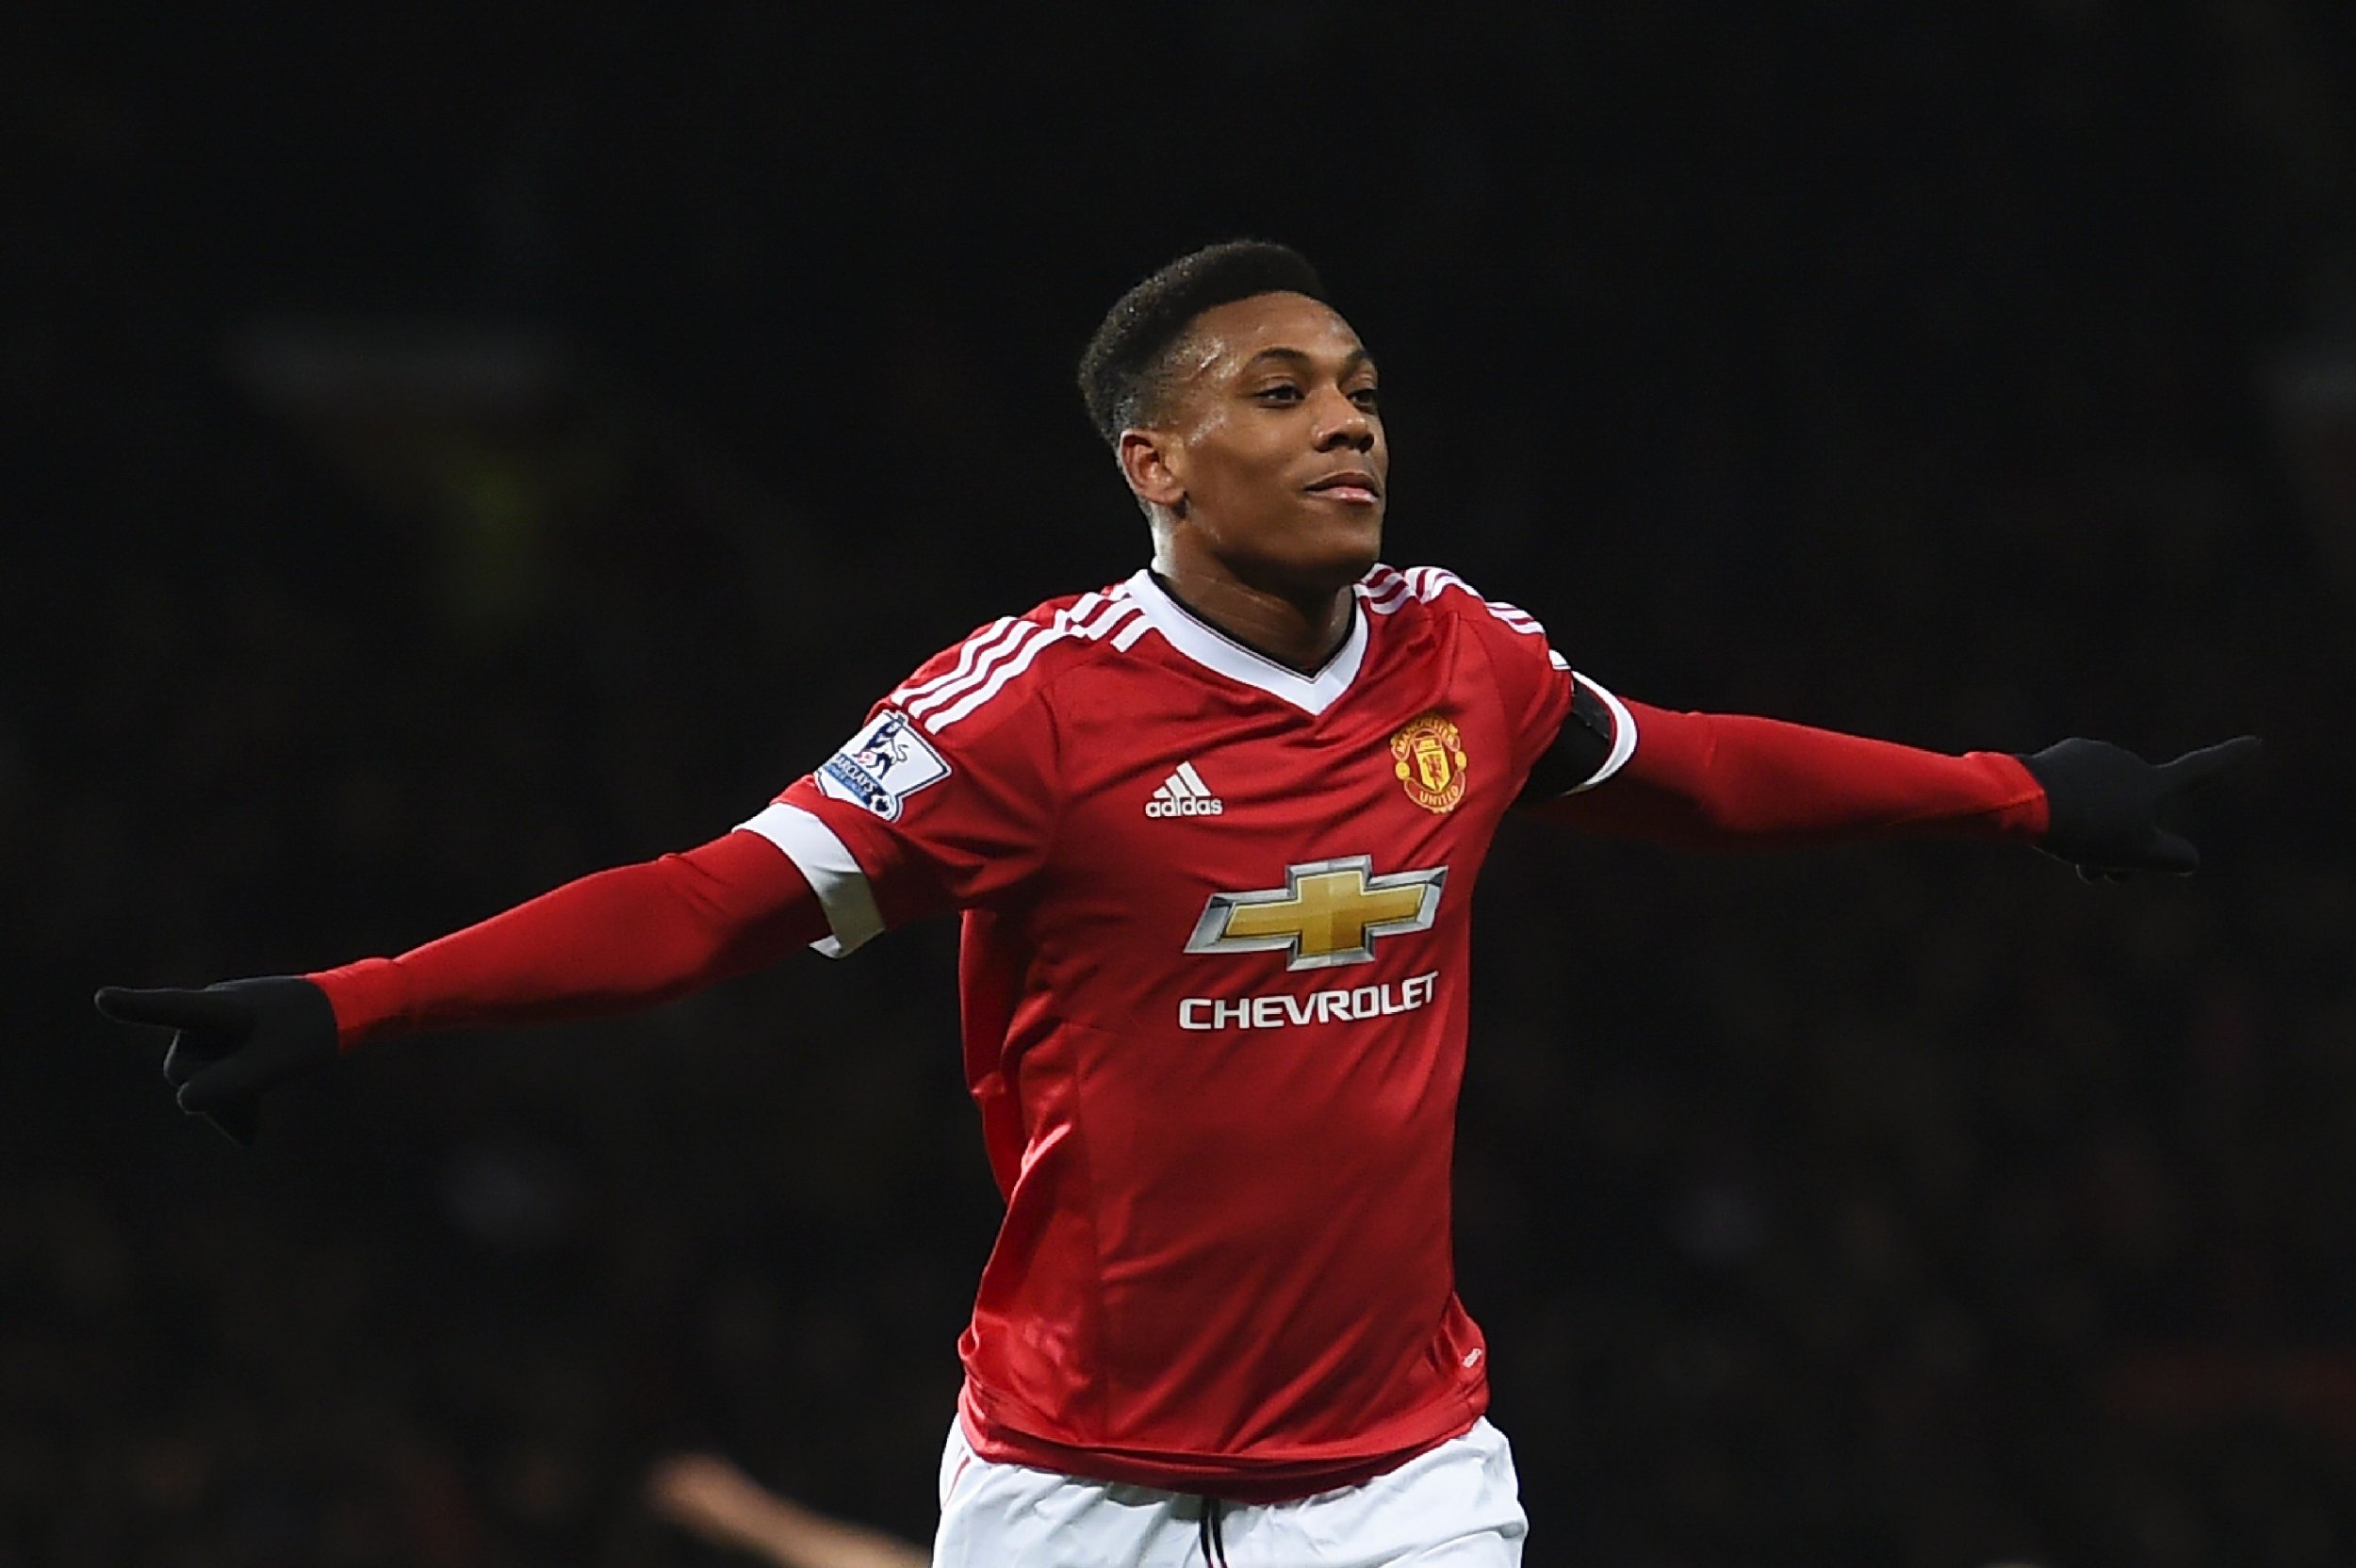 Anthony Martial was Manchester United's most expensive signing of summer 2015.